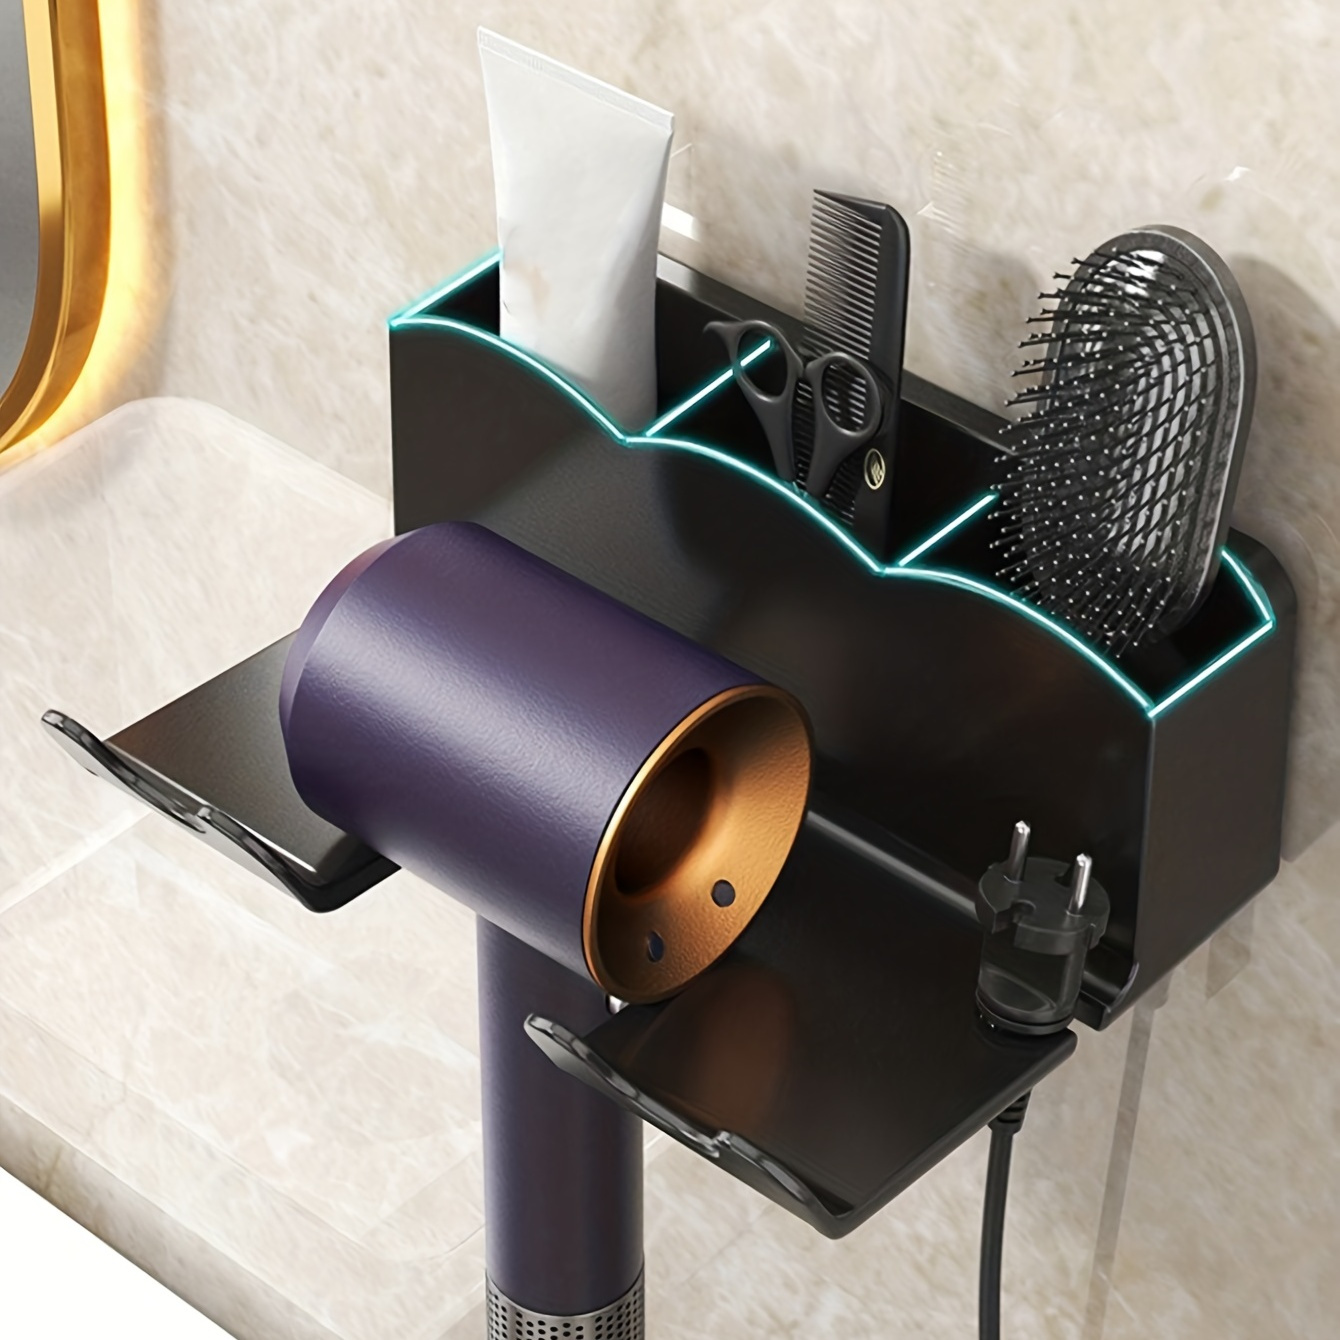 

1pc Stylish Wall-mounted Hair Dryer Rack With Free Punching Toilet Rack And Bathroom Storage Shelf - Keep Your Hair Dryer Organized And Accessible Bathroom Accessories